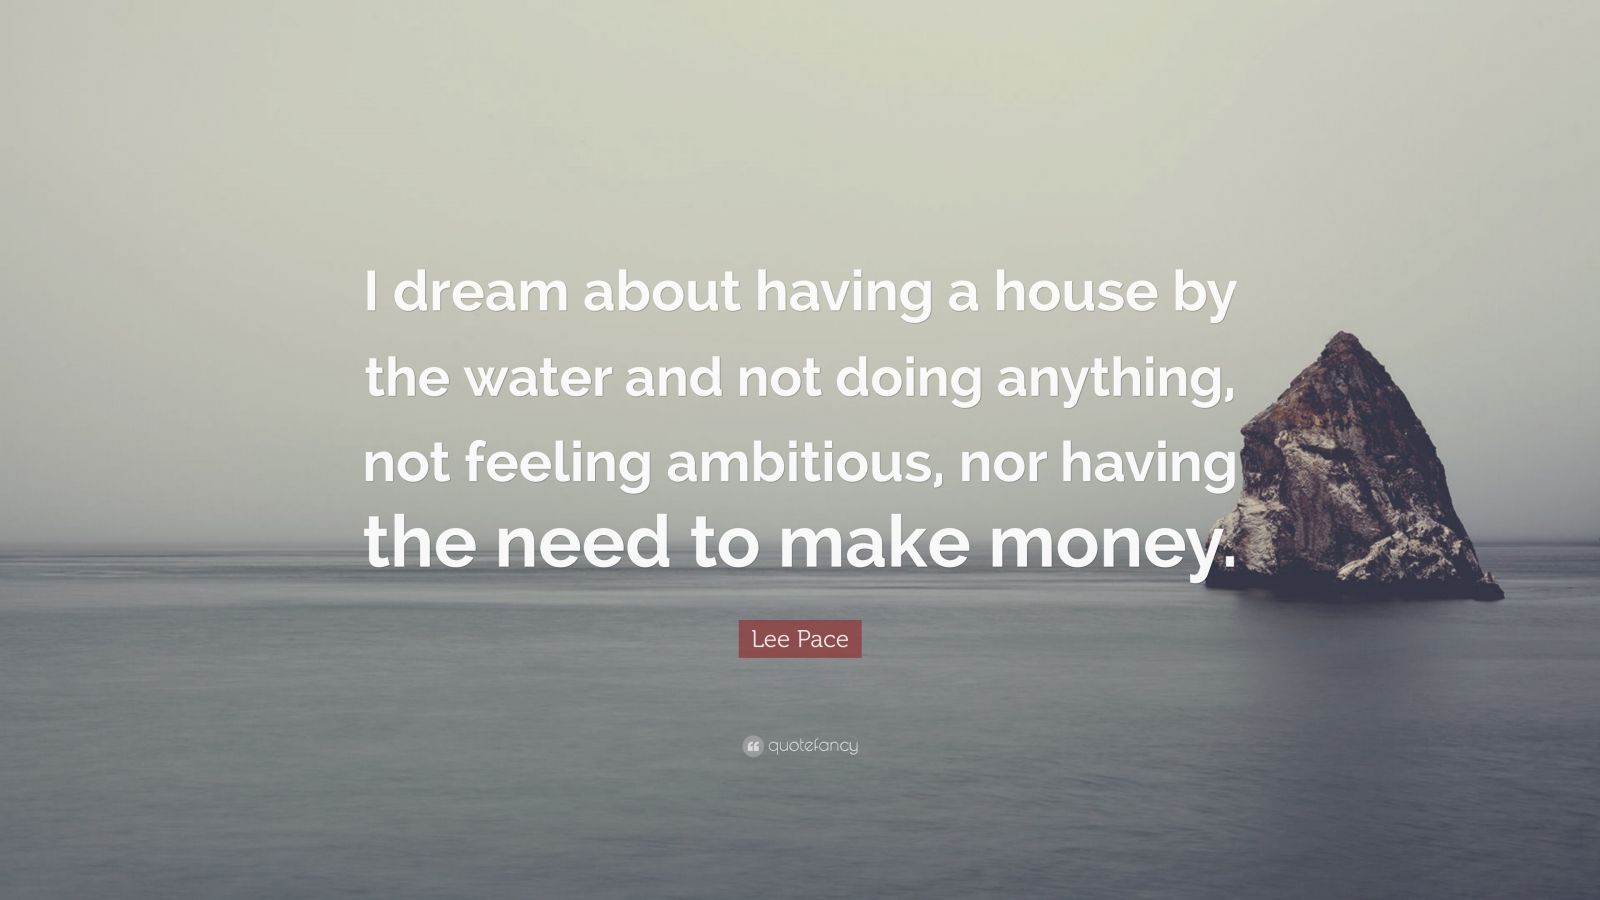 Lee Pace Quote: "I dream about having a house by the water and not doing anything, not feeling ...